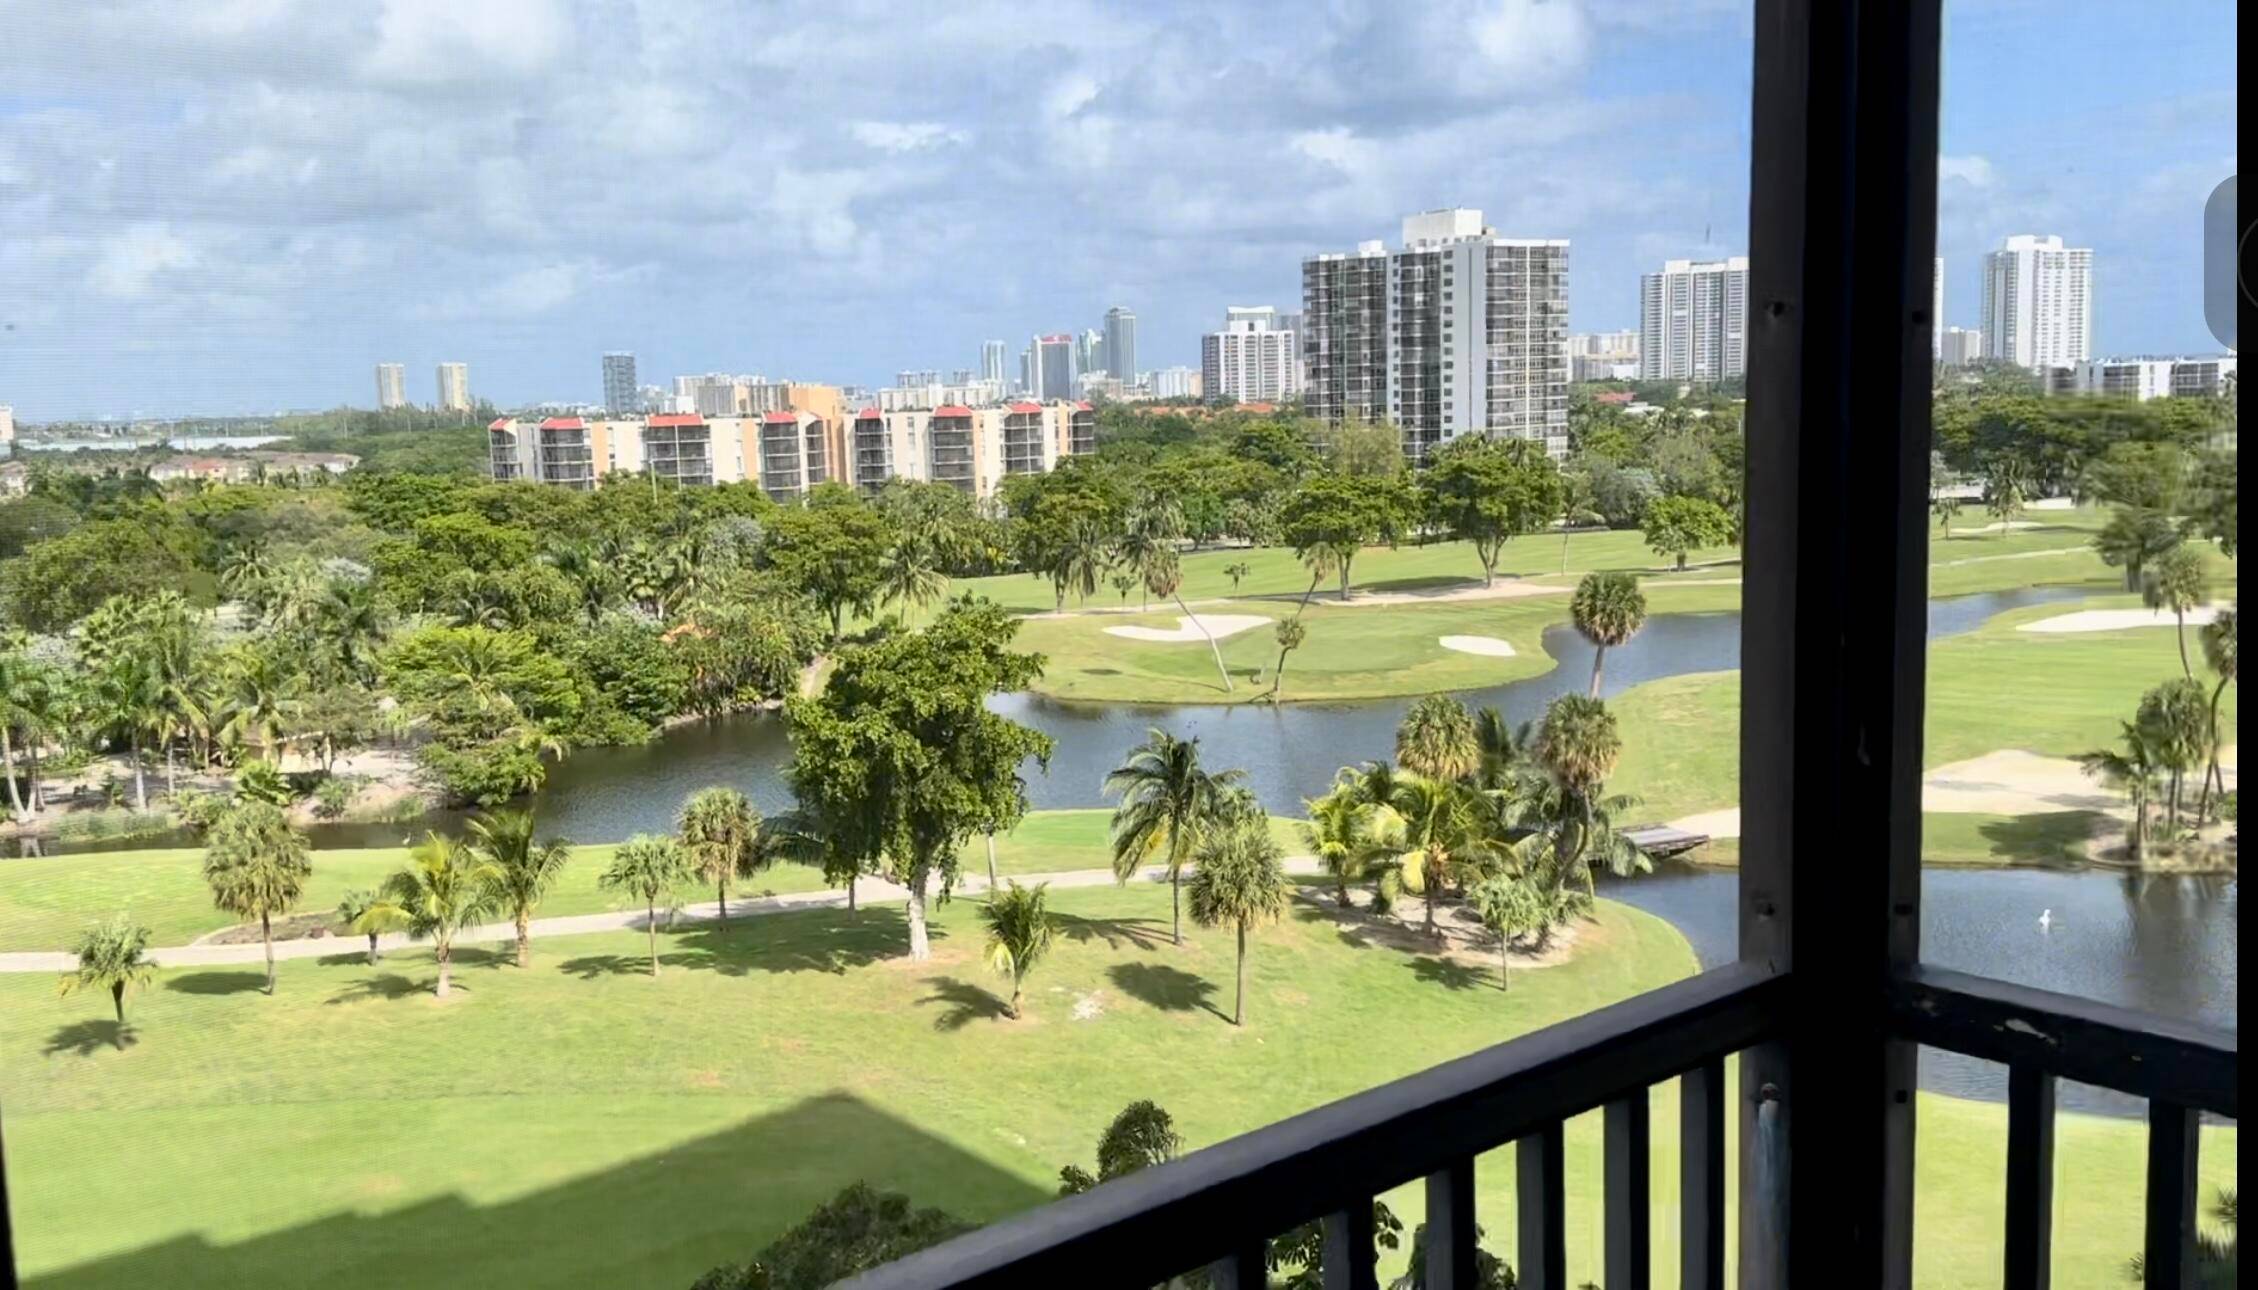 This 9th floor 2 bedroom condo in Coronado Towers, Aventura, offers stunning golf course and skyline views.